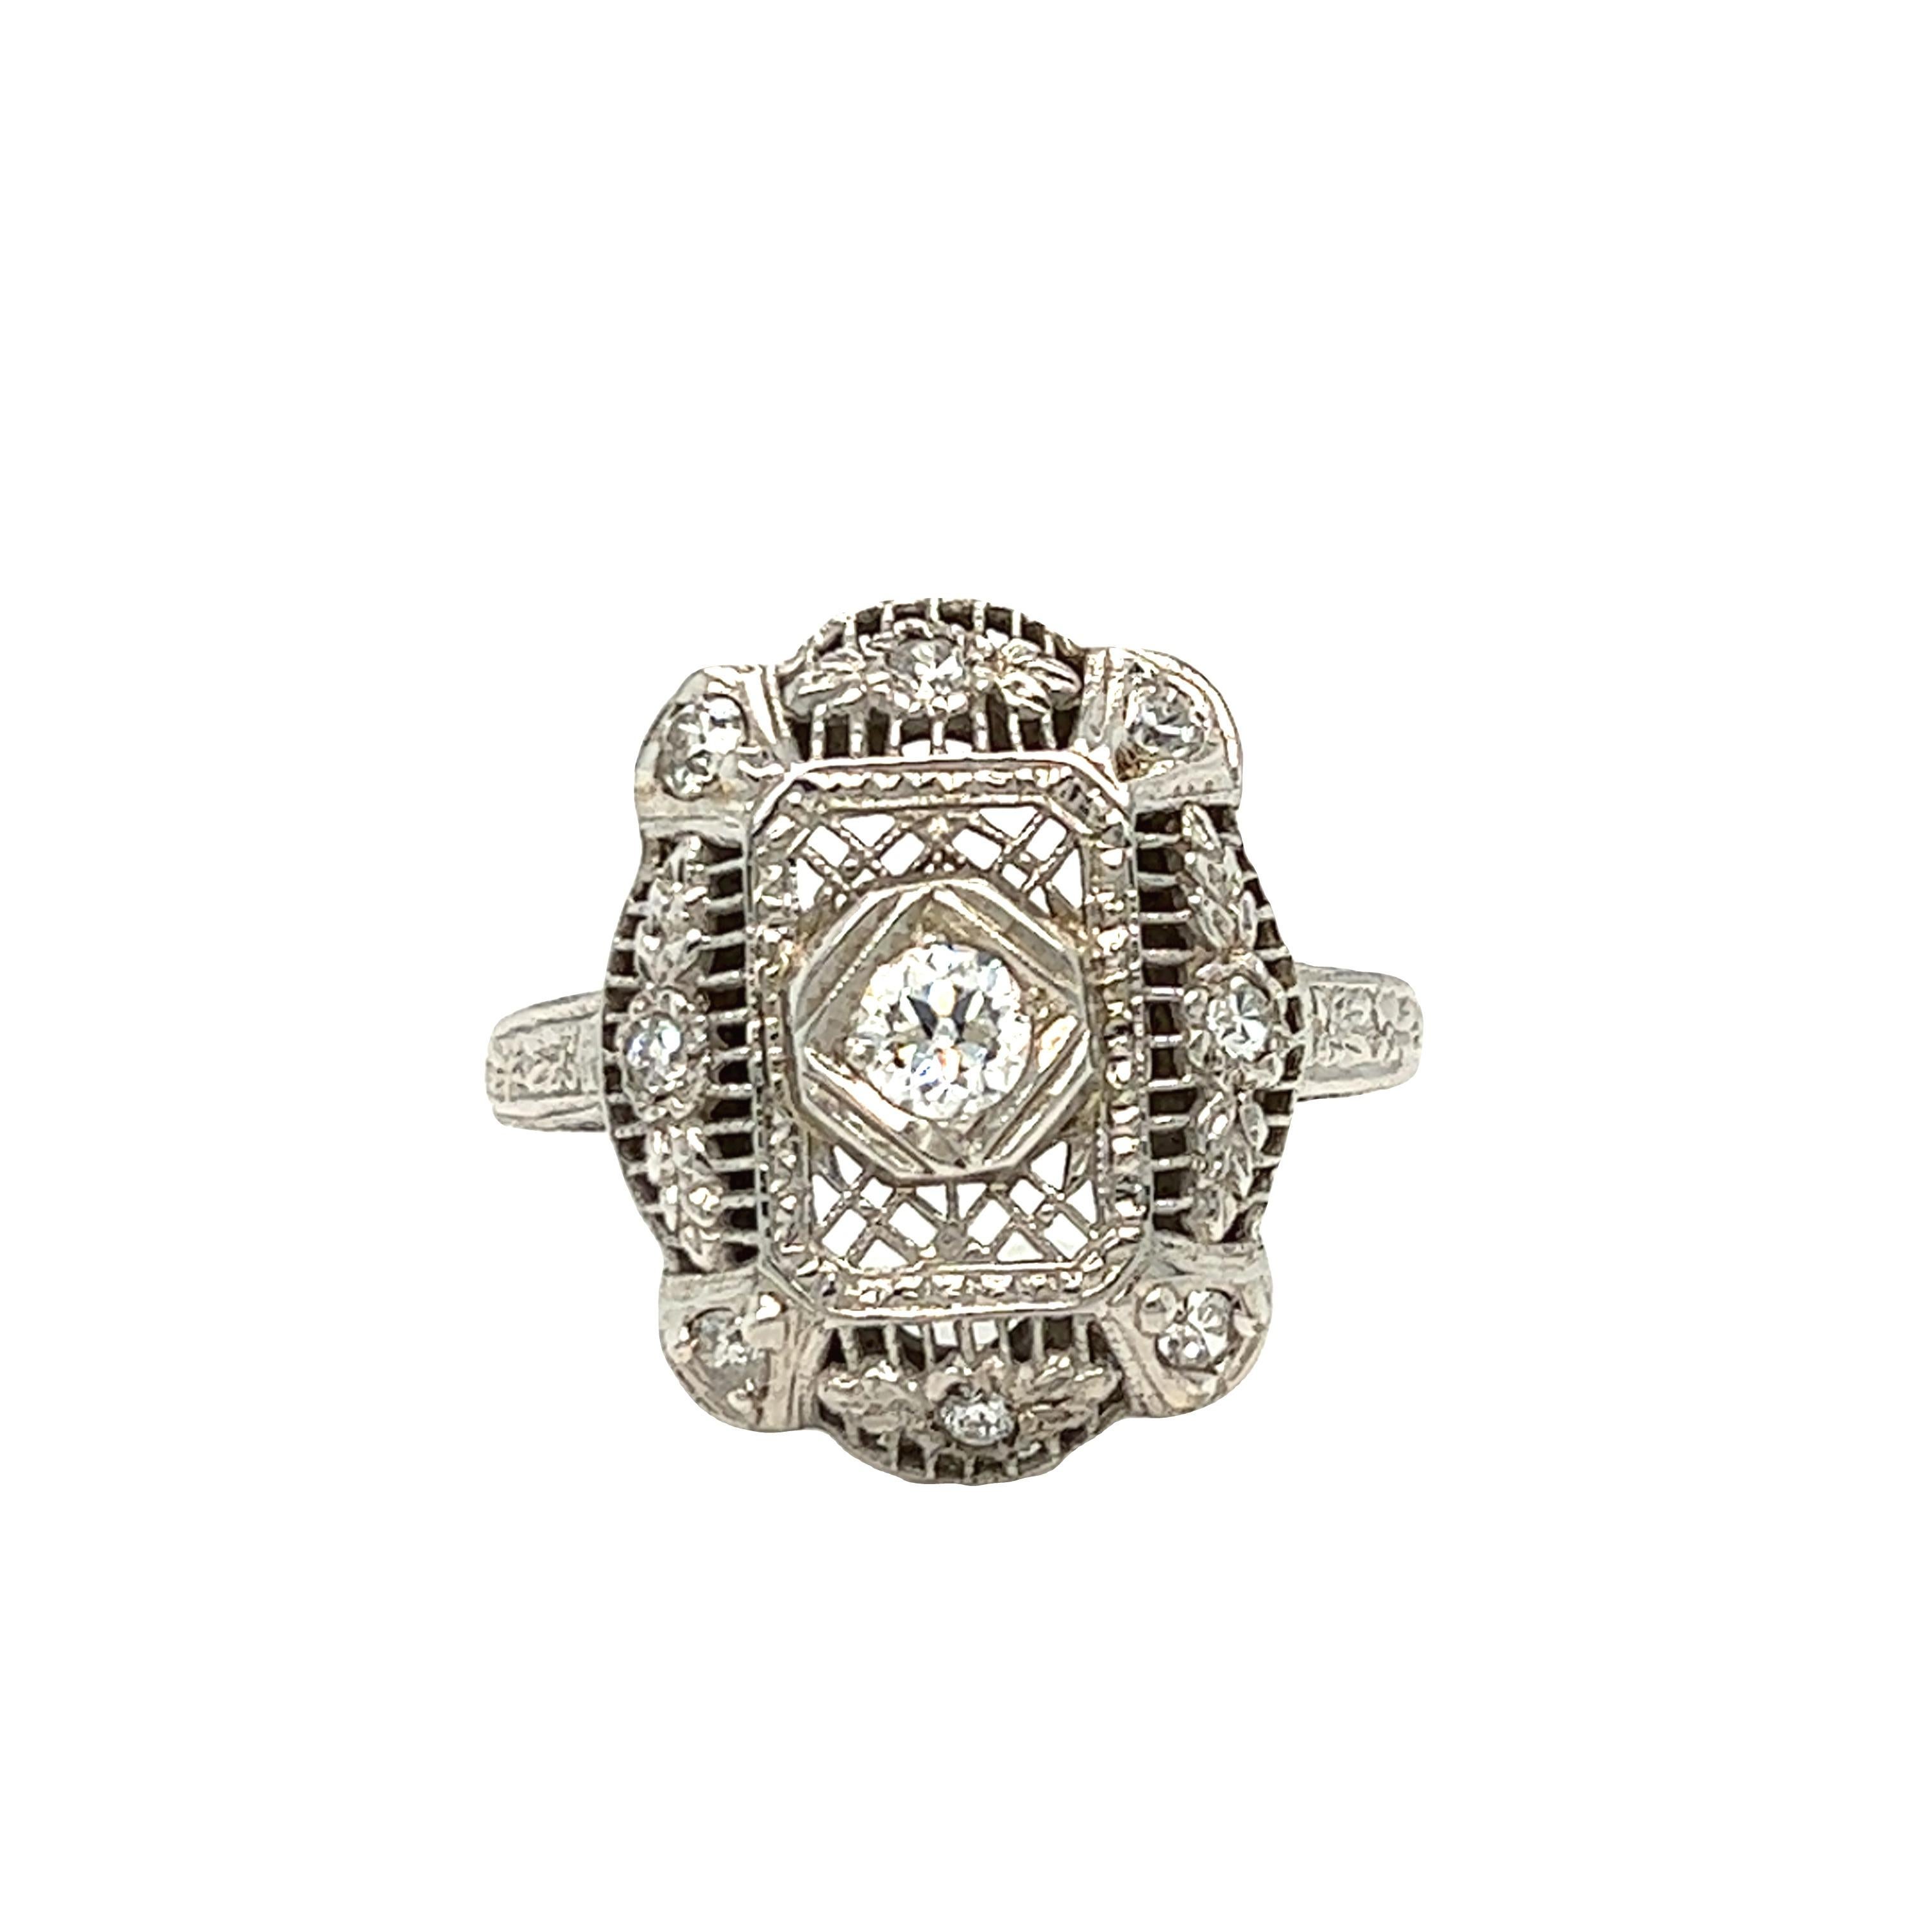 An old European cut diamond weighing approximately .45 carat - H color with VS2 clarity is centered in an antique Edwardian era 18K white gold ring with single cut diamond accents weighing collectively 0.24 - eye clean and bright. The ring displays